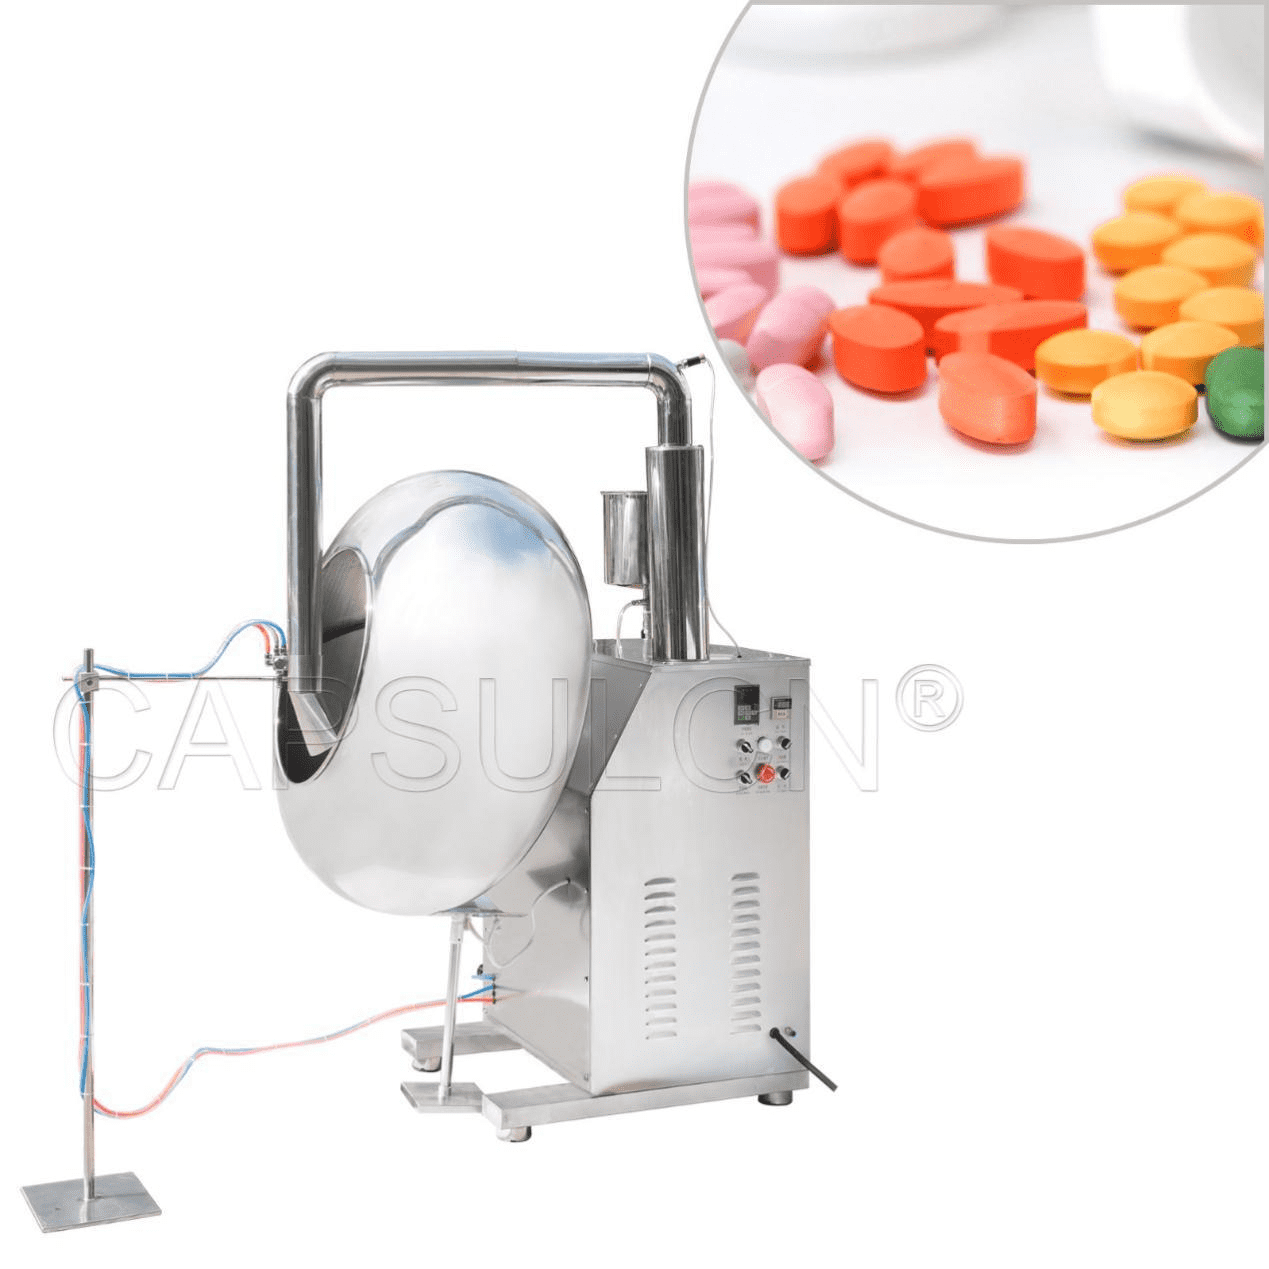 byc 1000 tablet coating machine